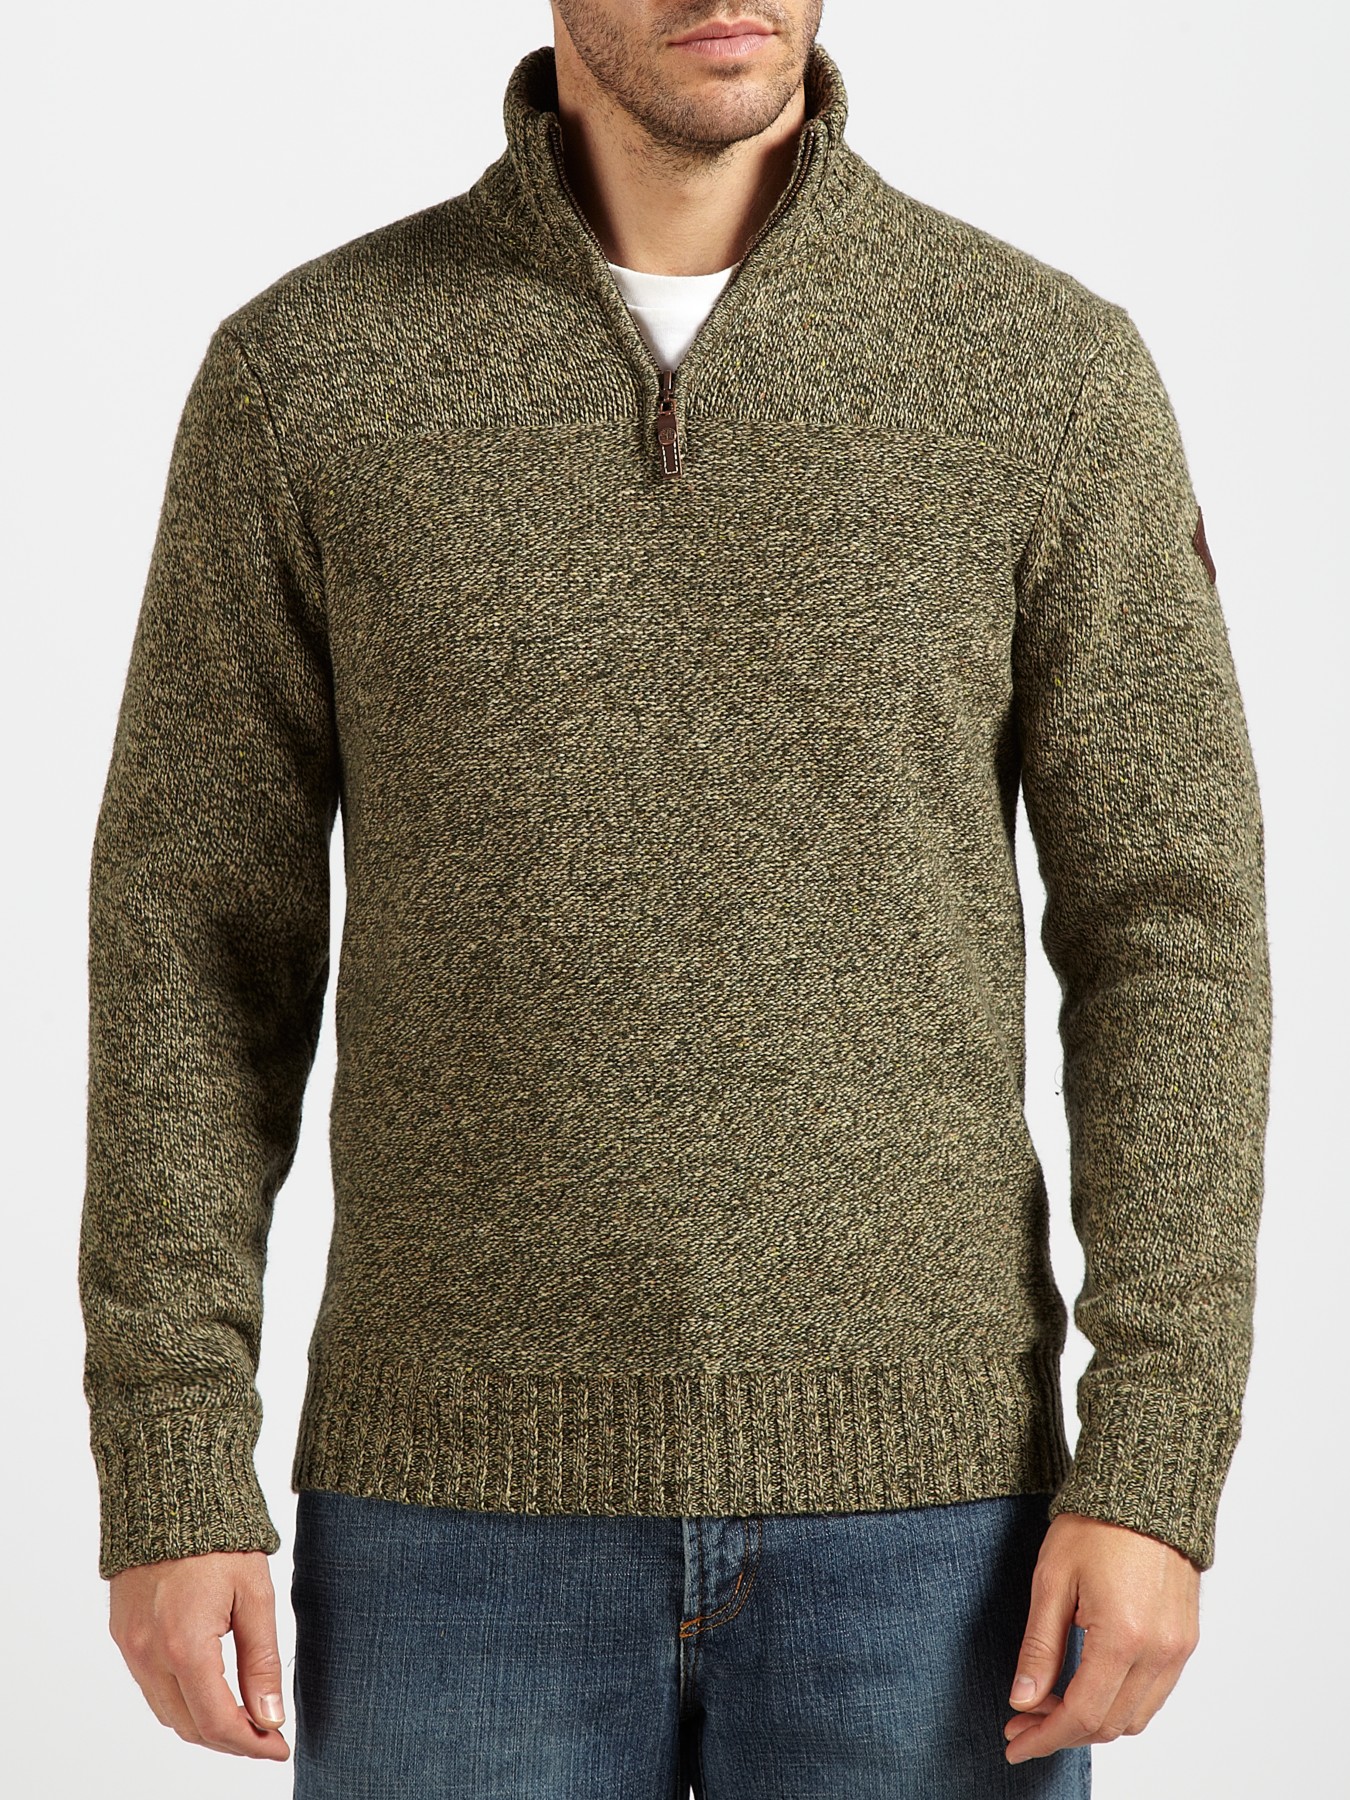 Timberland Lambswool Donegal Half Zip Sweater in Brown for Men - Lyst